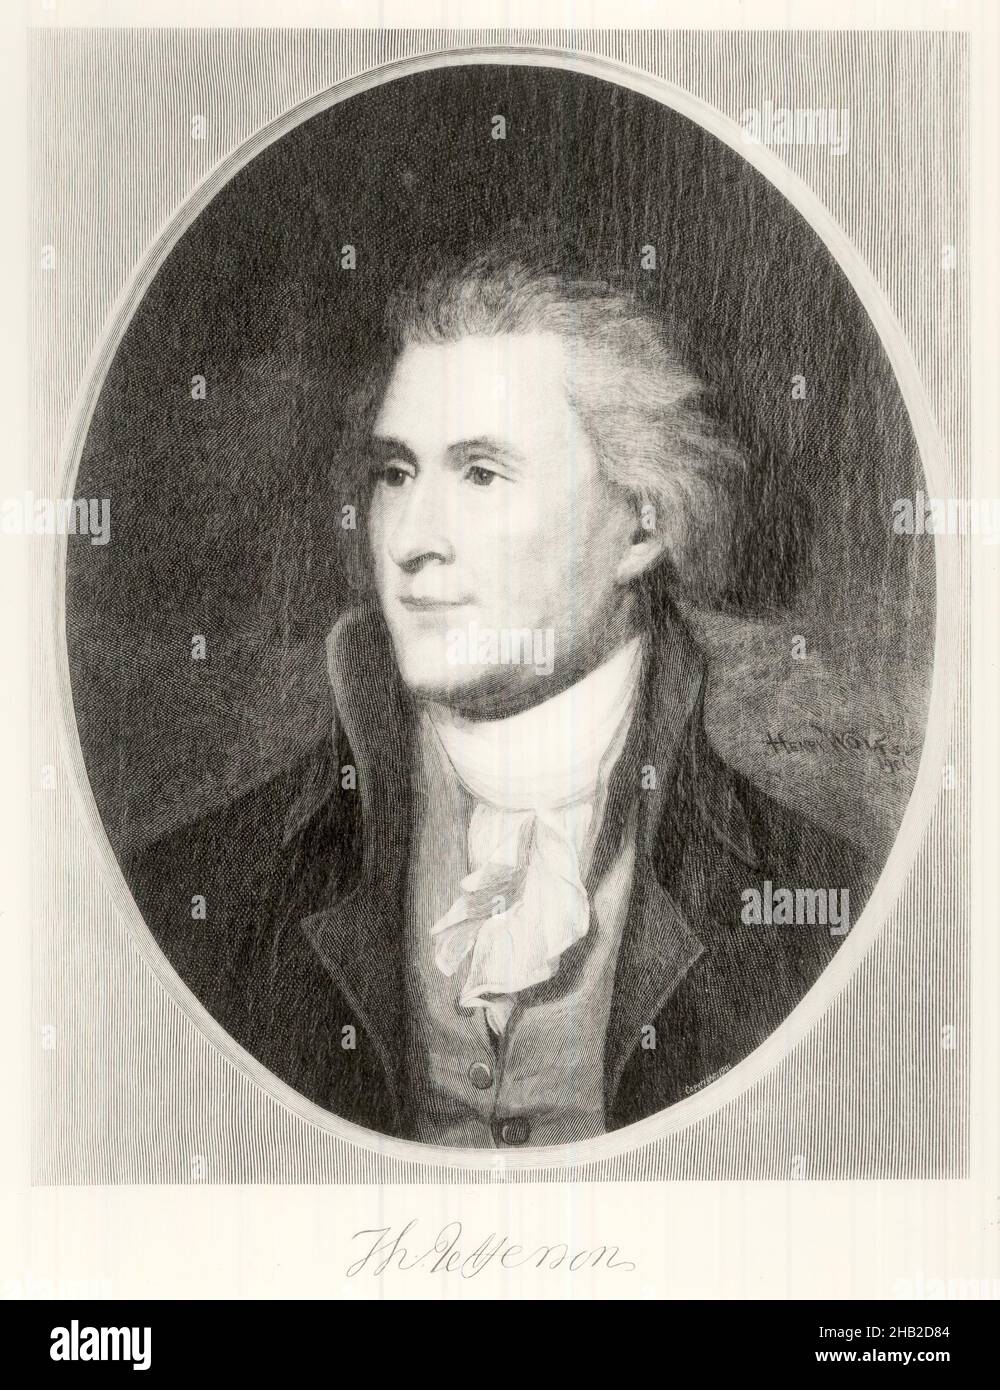 Thomas Jefferson, Wood engraving on fine tissue paper, 1901, 9 3/4 x 7 15/16 in., 24.8 x 20.2 cm, cravate, Founding Father, government, history, leader, ndd6, politician, President, statesman, United States Stock Photo